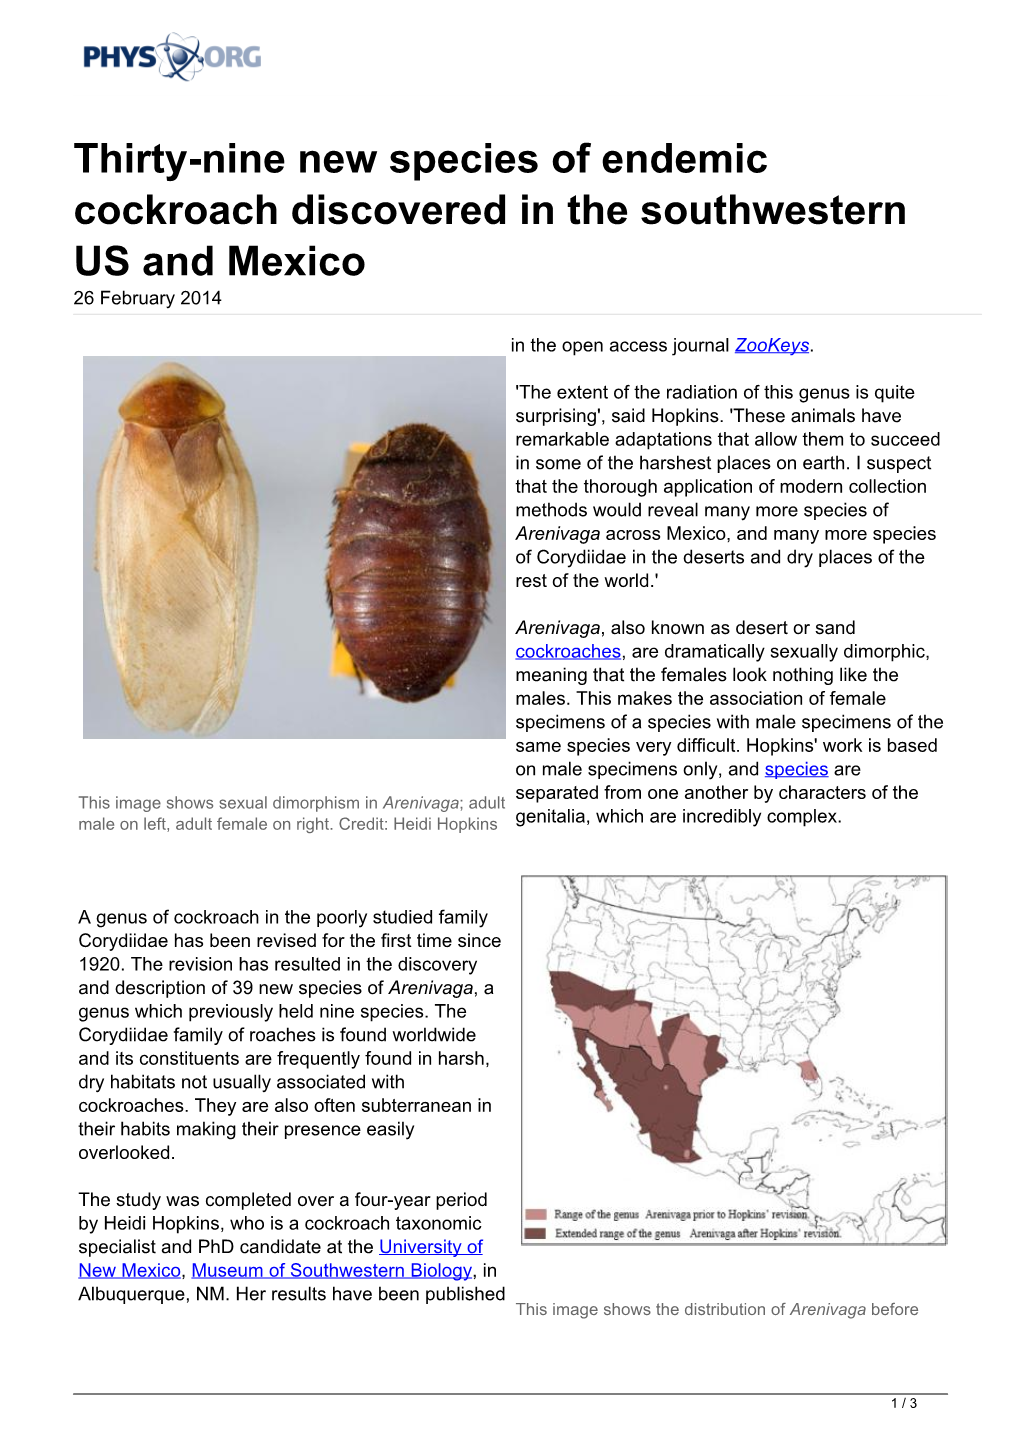 Thirty-Nine New Species of Endemic Cockroach Discovered in the Southwestern US and Mexico 26 February 2014